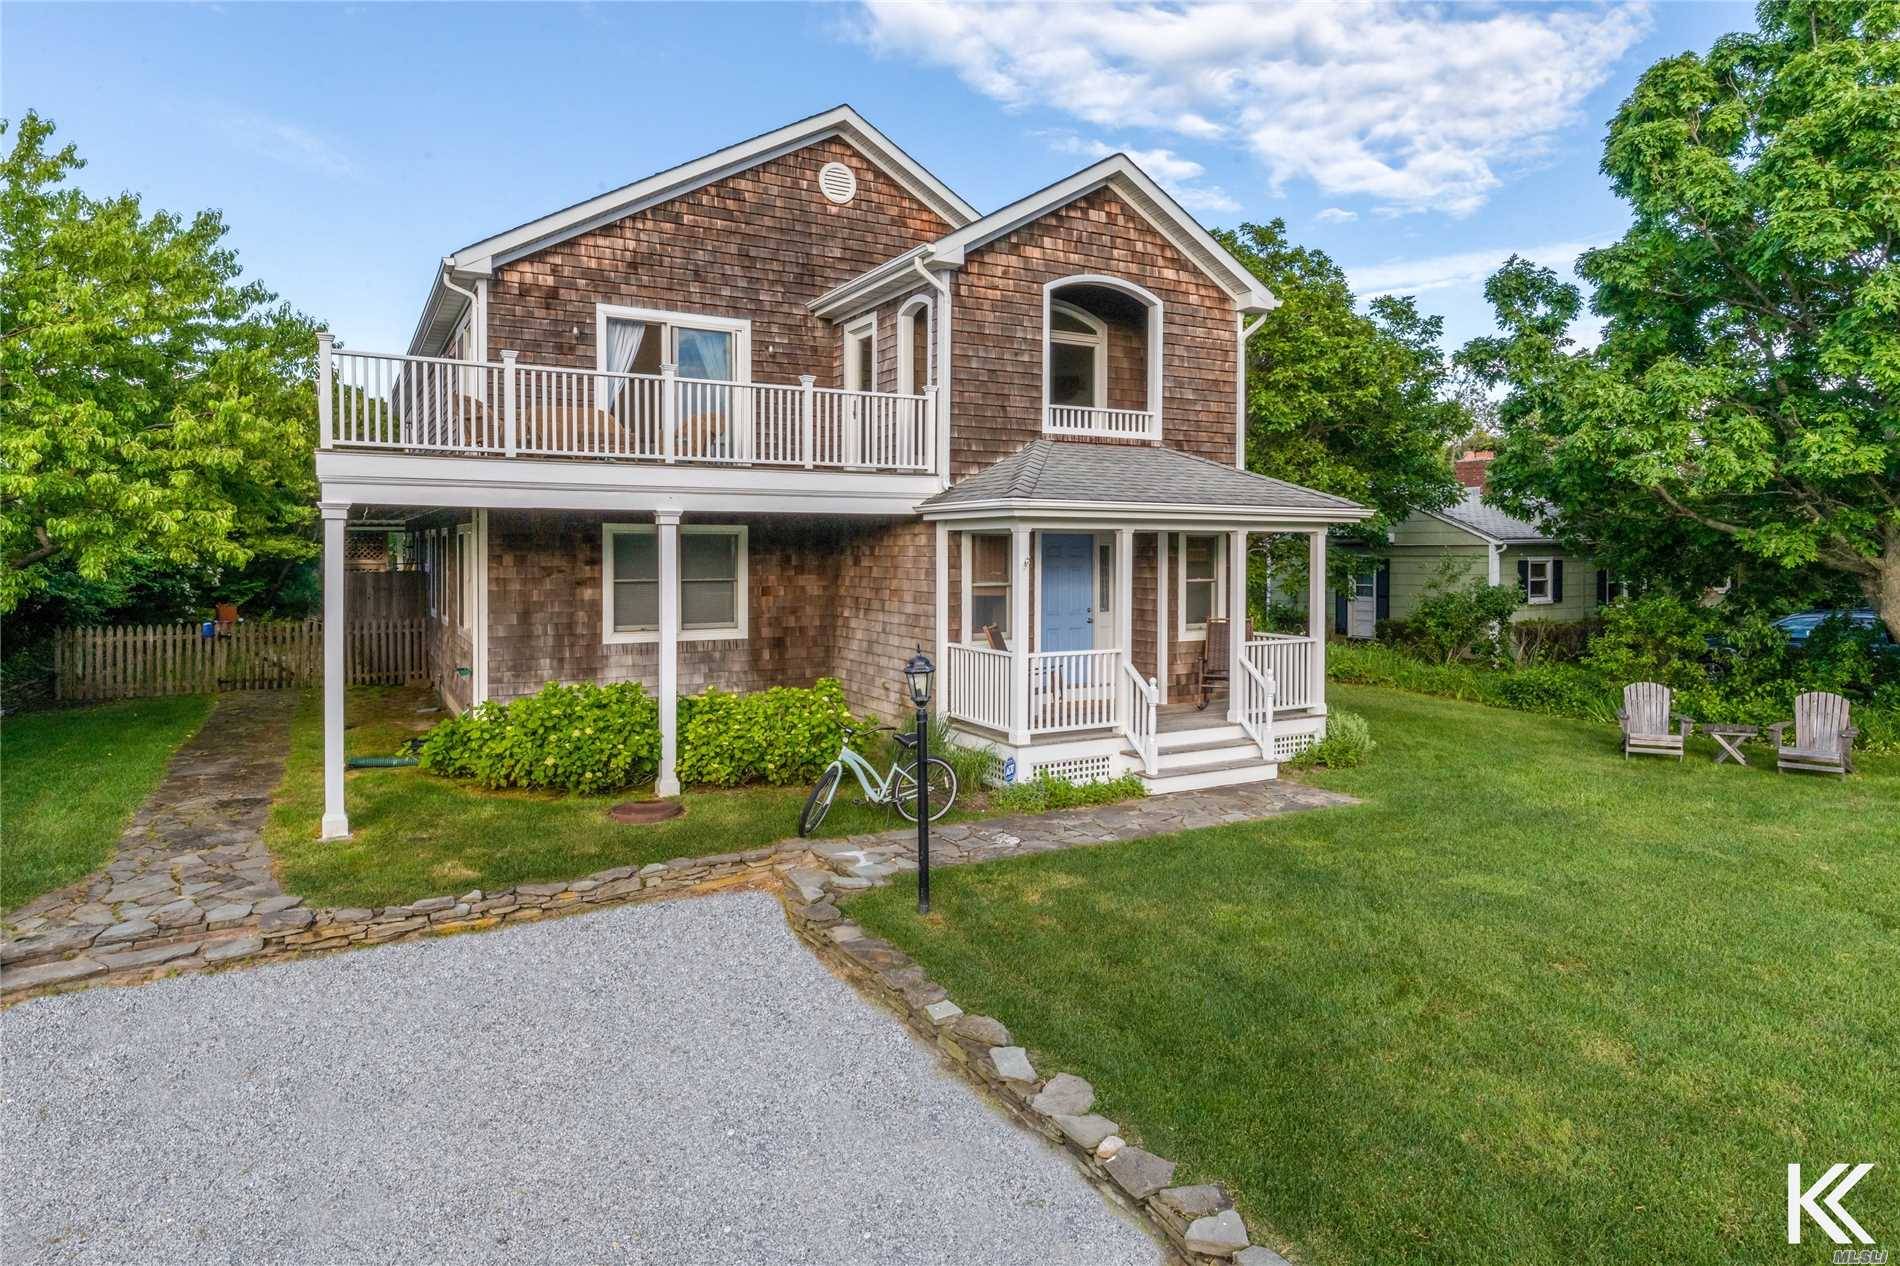 The Perfect Summer Home. Built In 2005, This Turnkey, Upside Down Style Shingle Colonial Features A Two Story Foyer, A Huge Great Room With Vaulted Ceilings, 2 Fieldstone Fireplaces, Custom ...